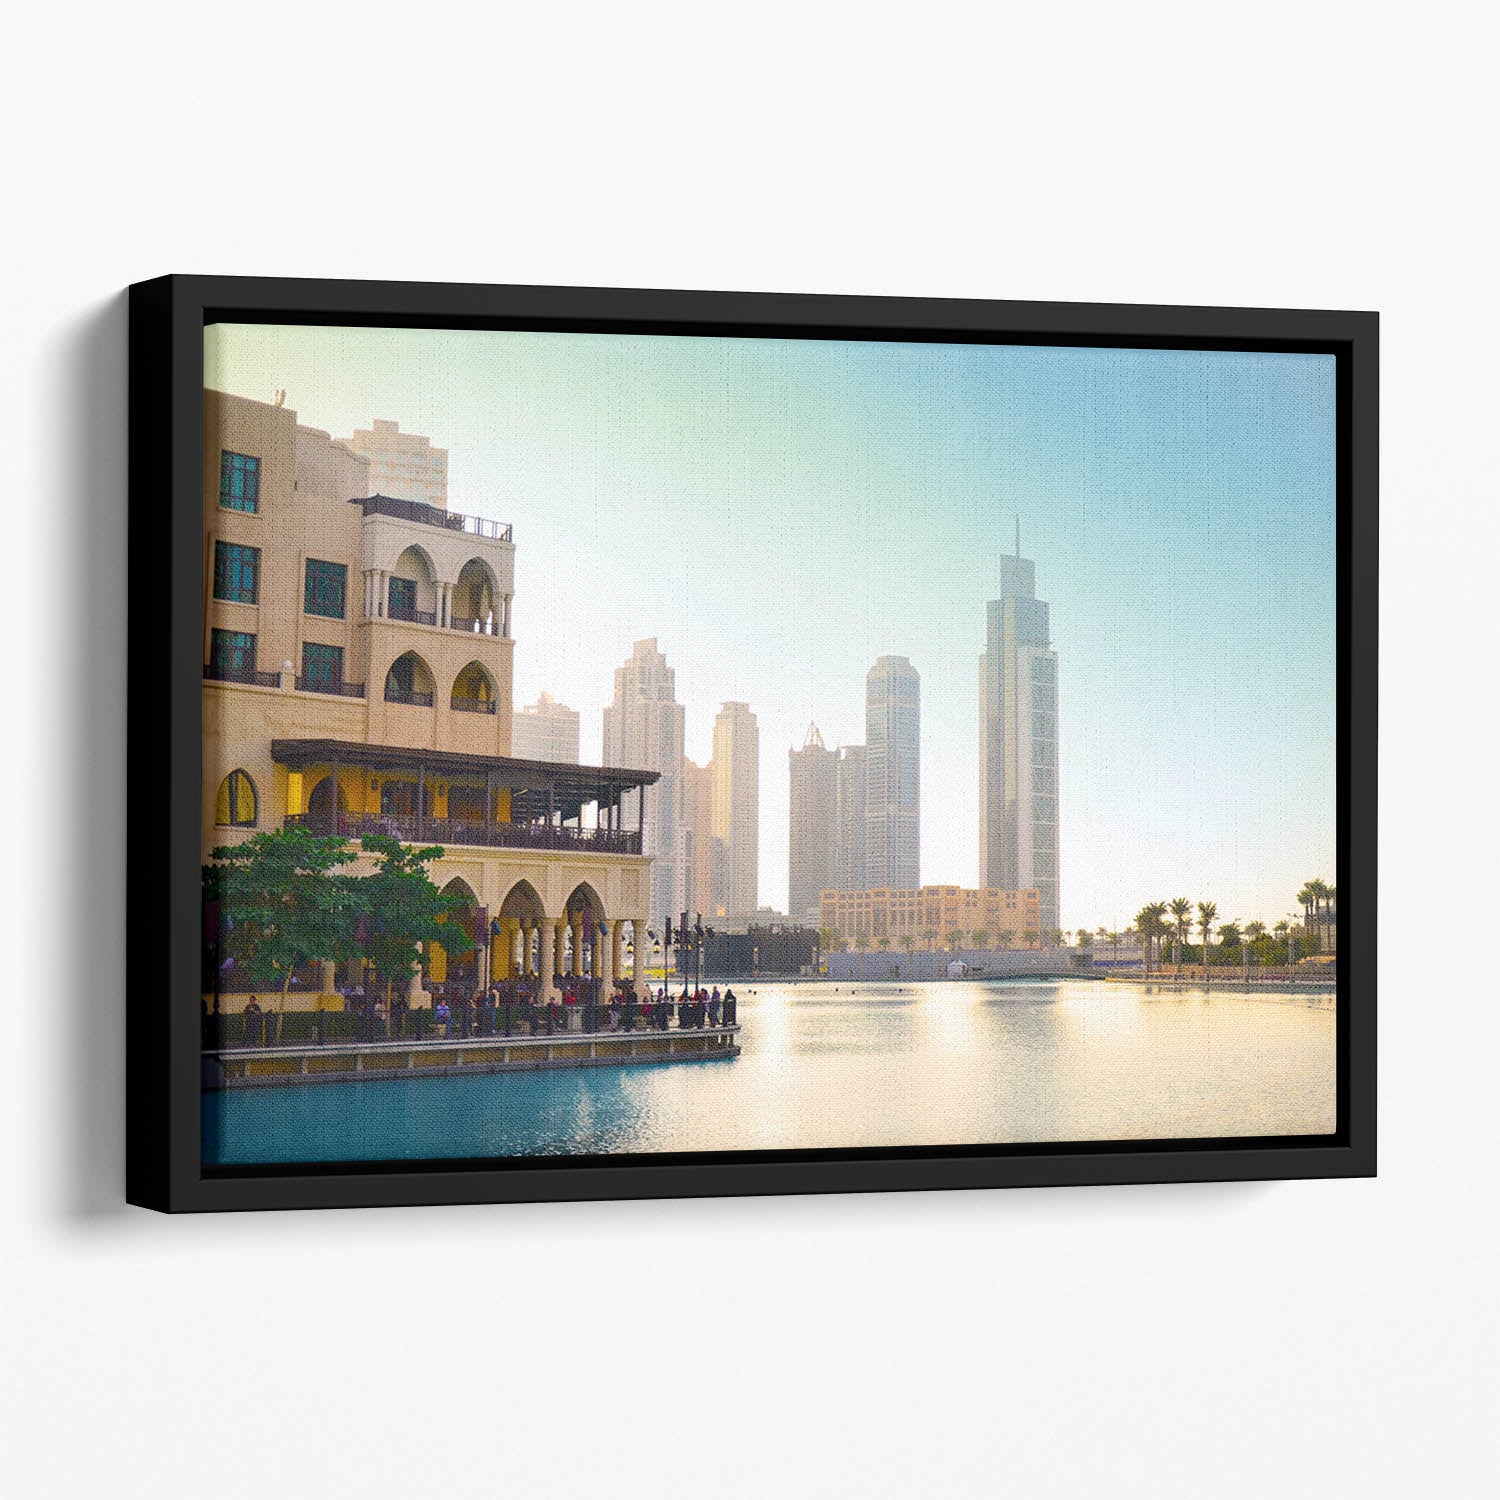 Dubai downtown at sunset Floating Framed Canvas